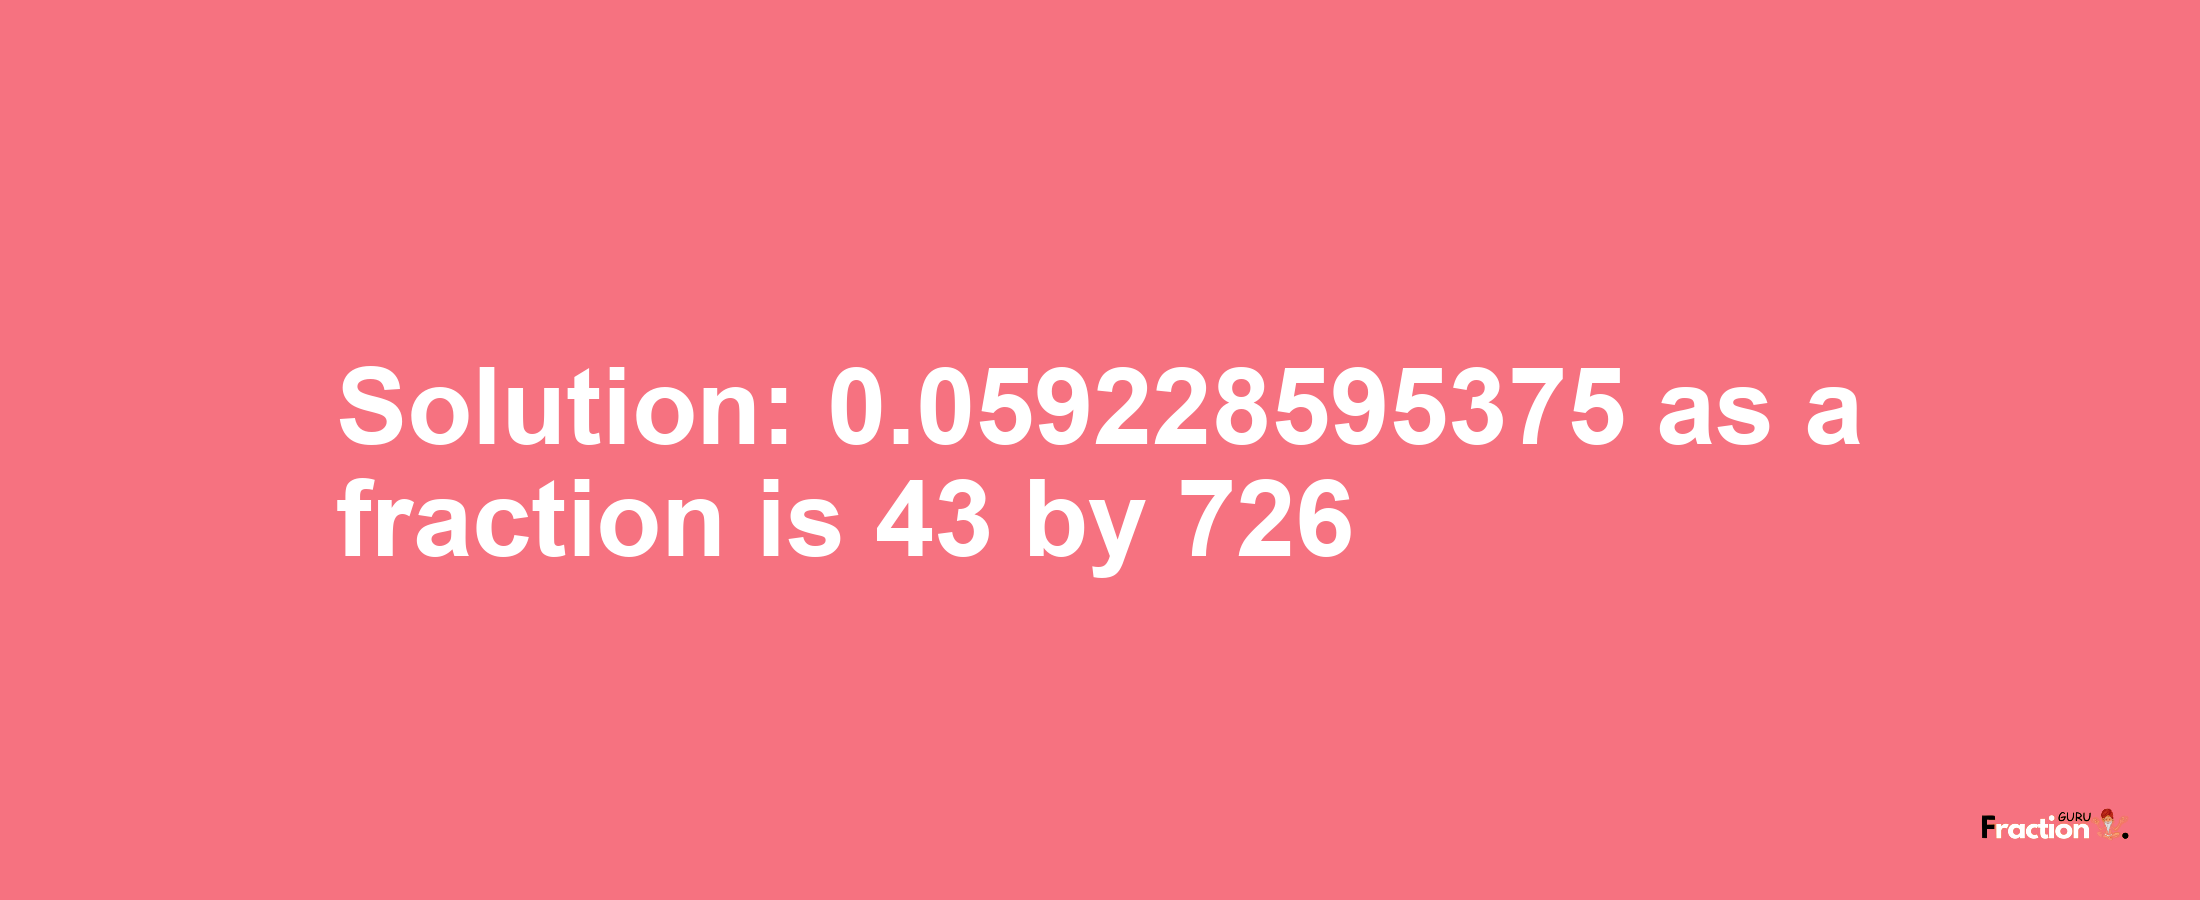 Solution:0.059228595375 as a fraction is 43/726